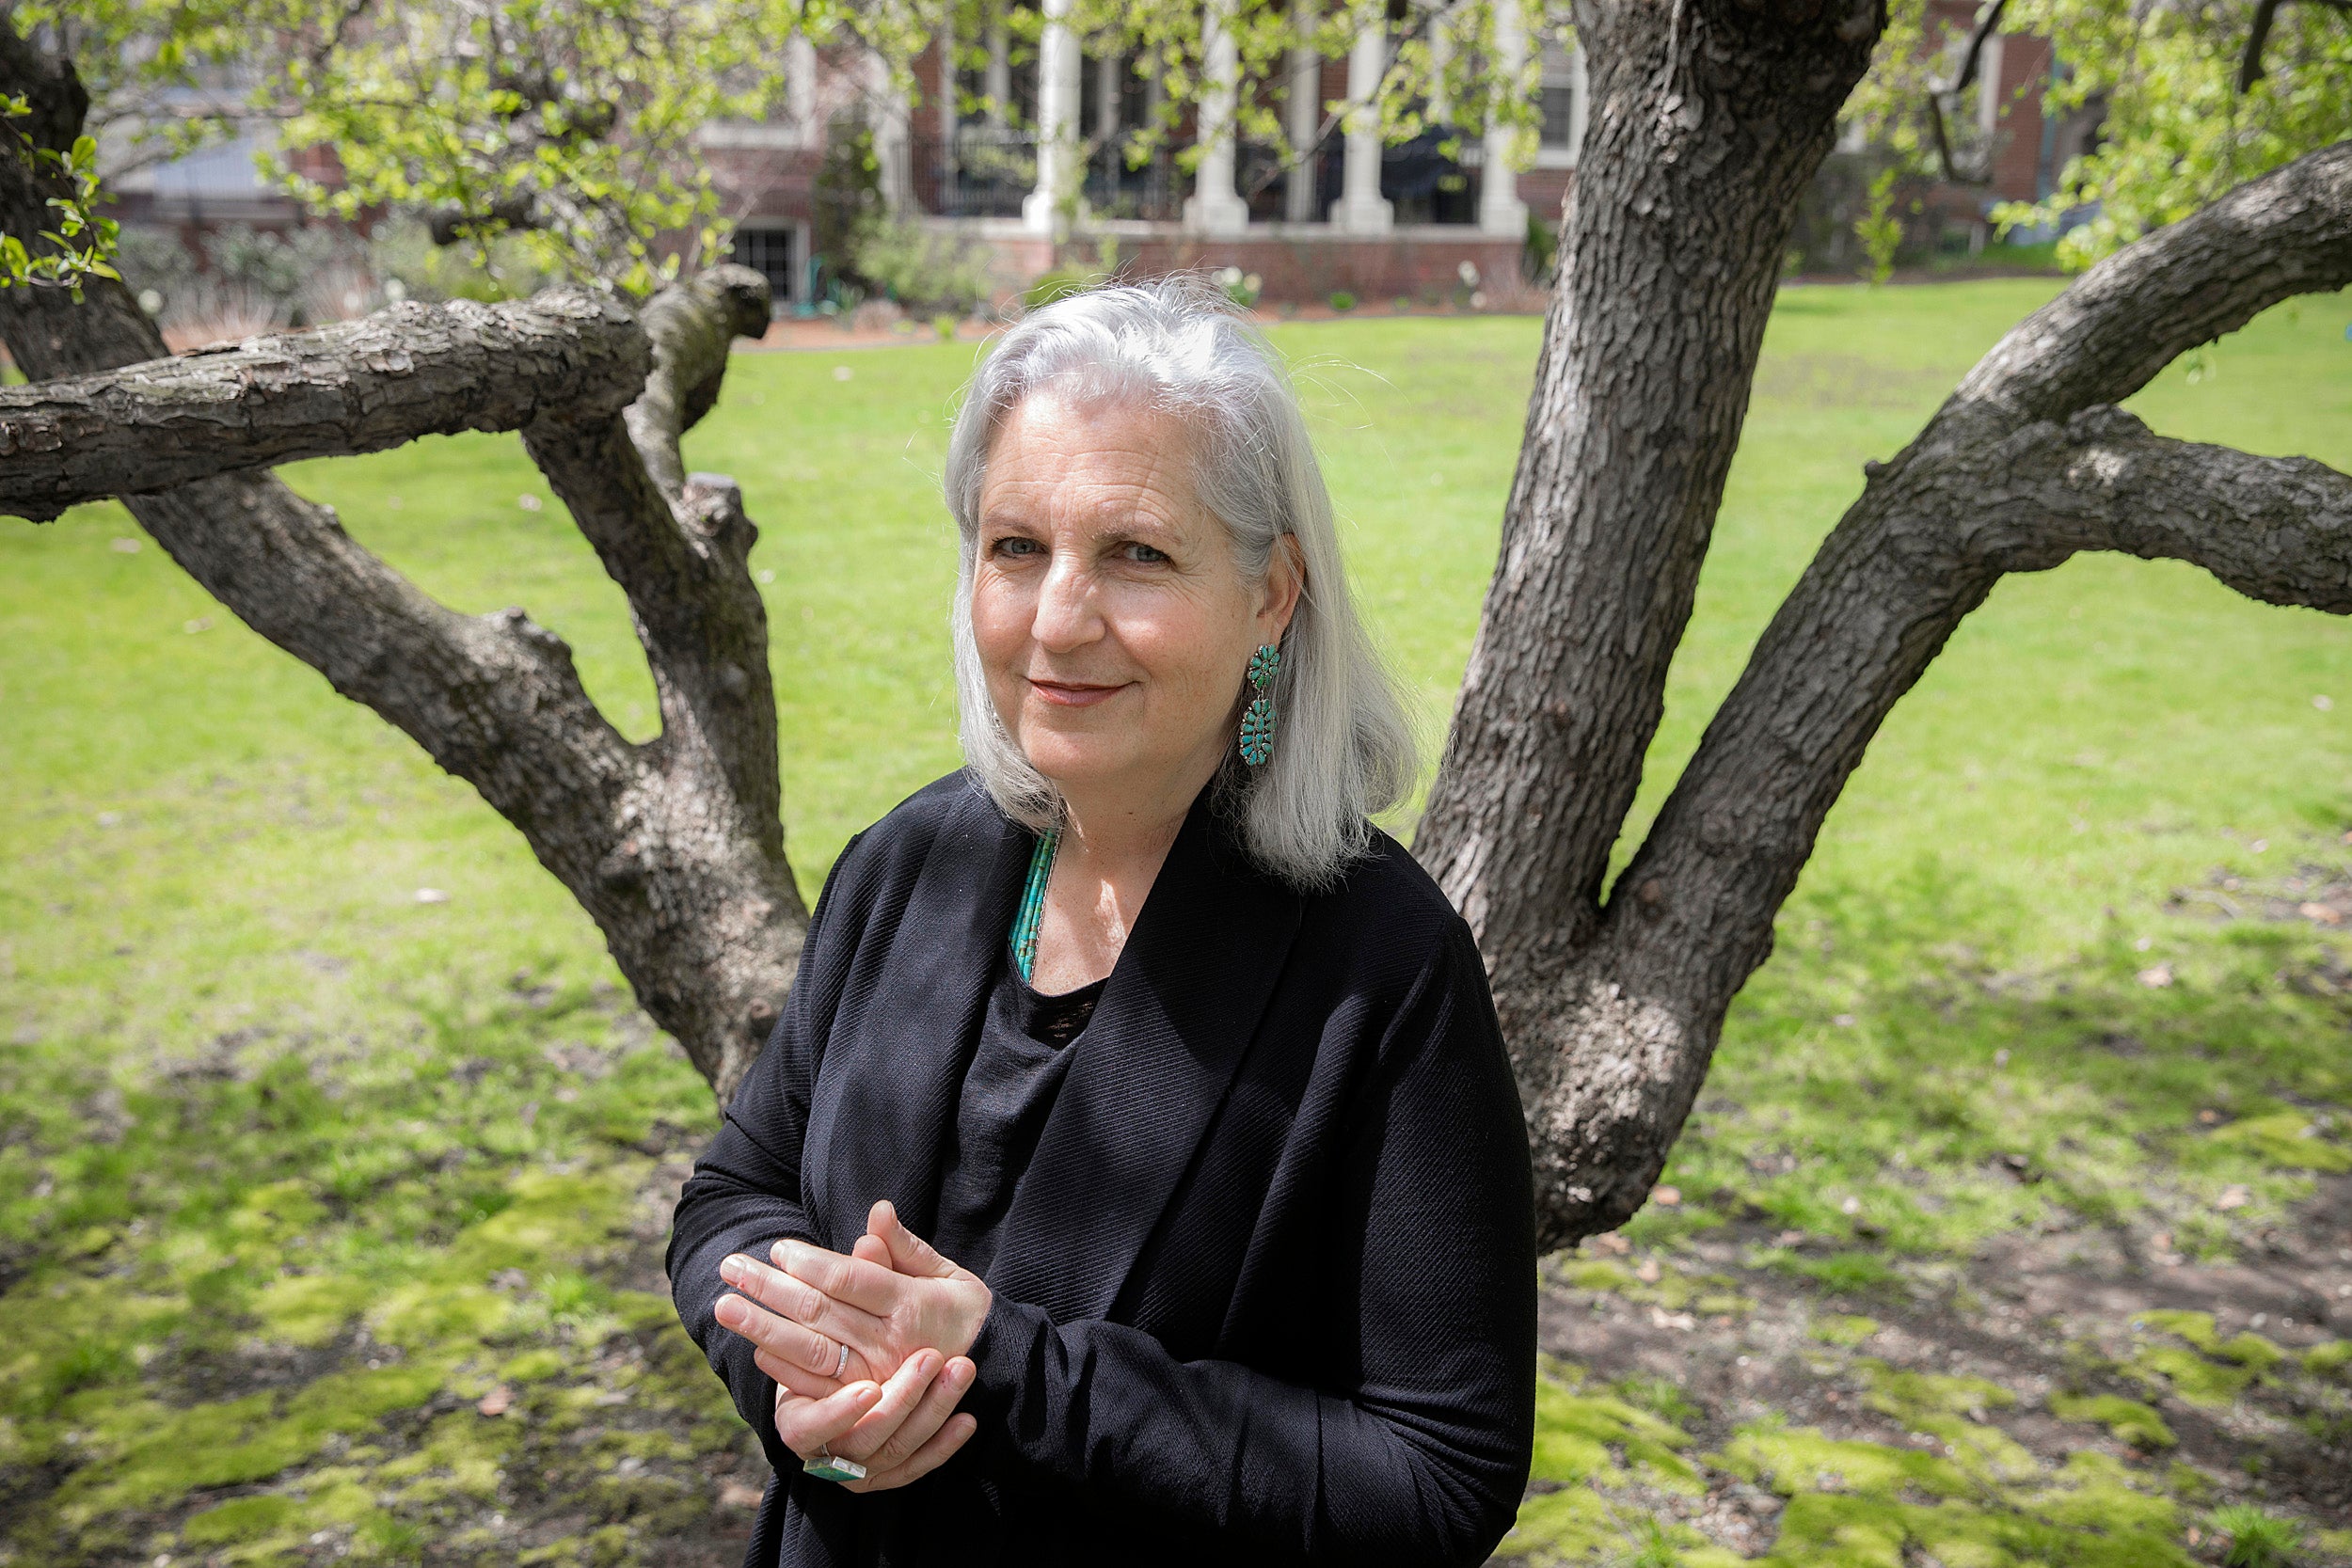 Terry Tempest Williams stands with hands clasped in front of a tree.